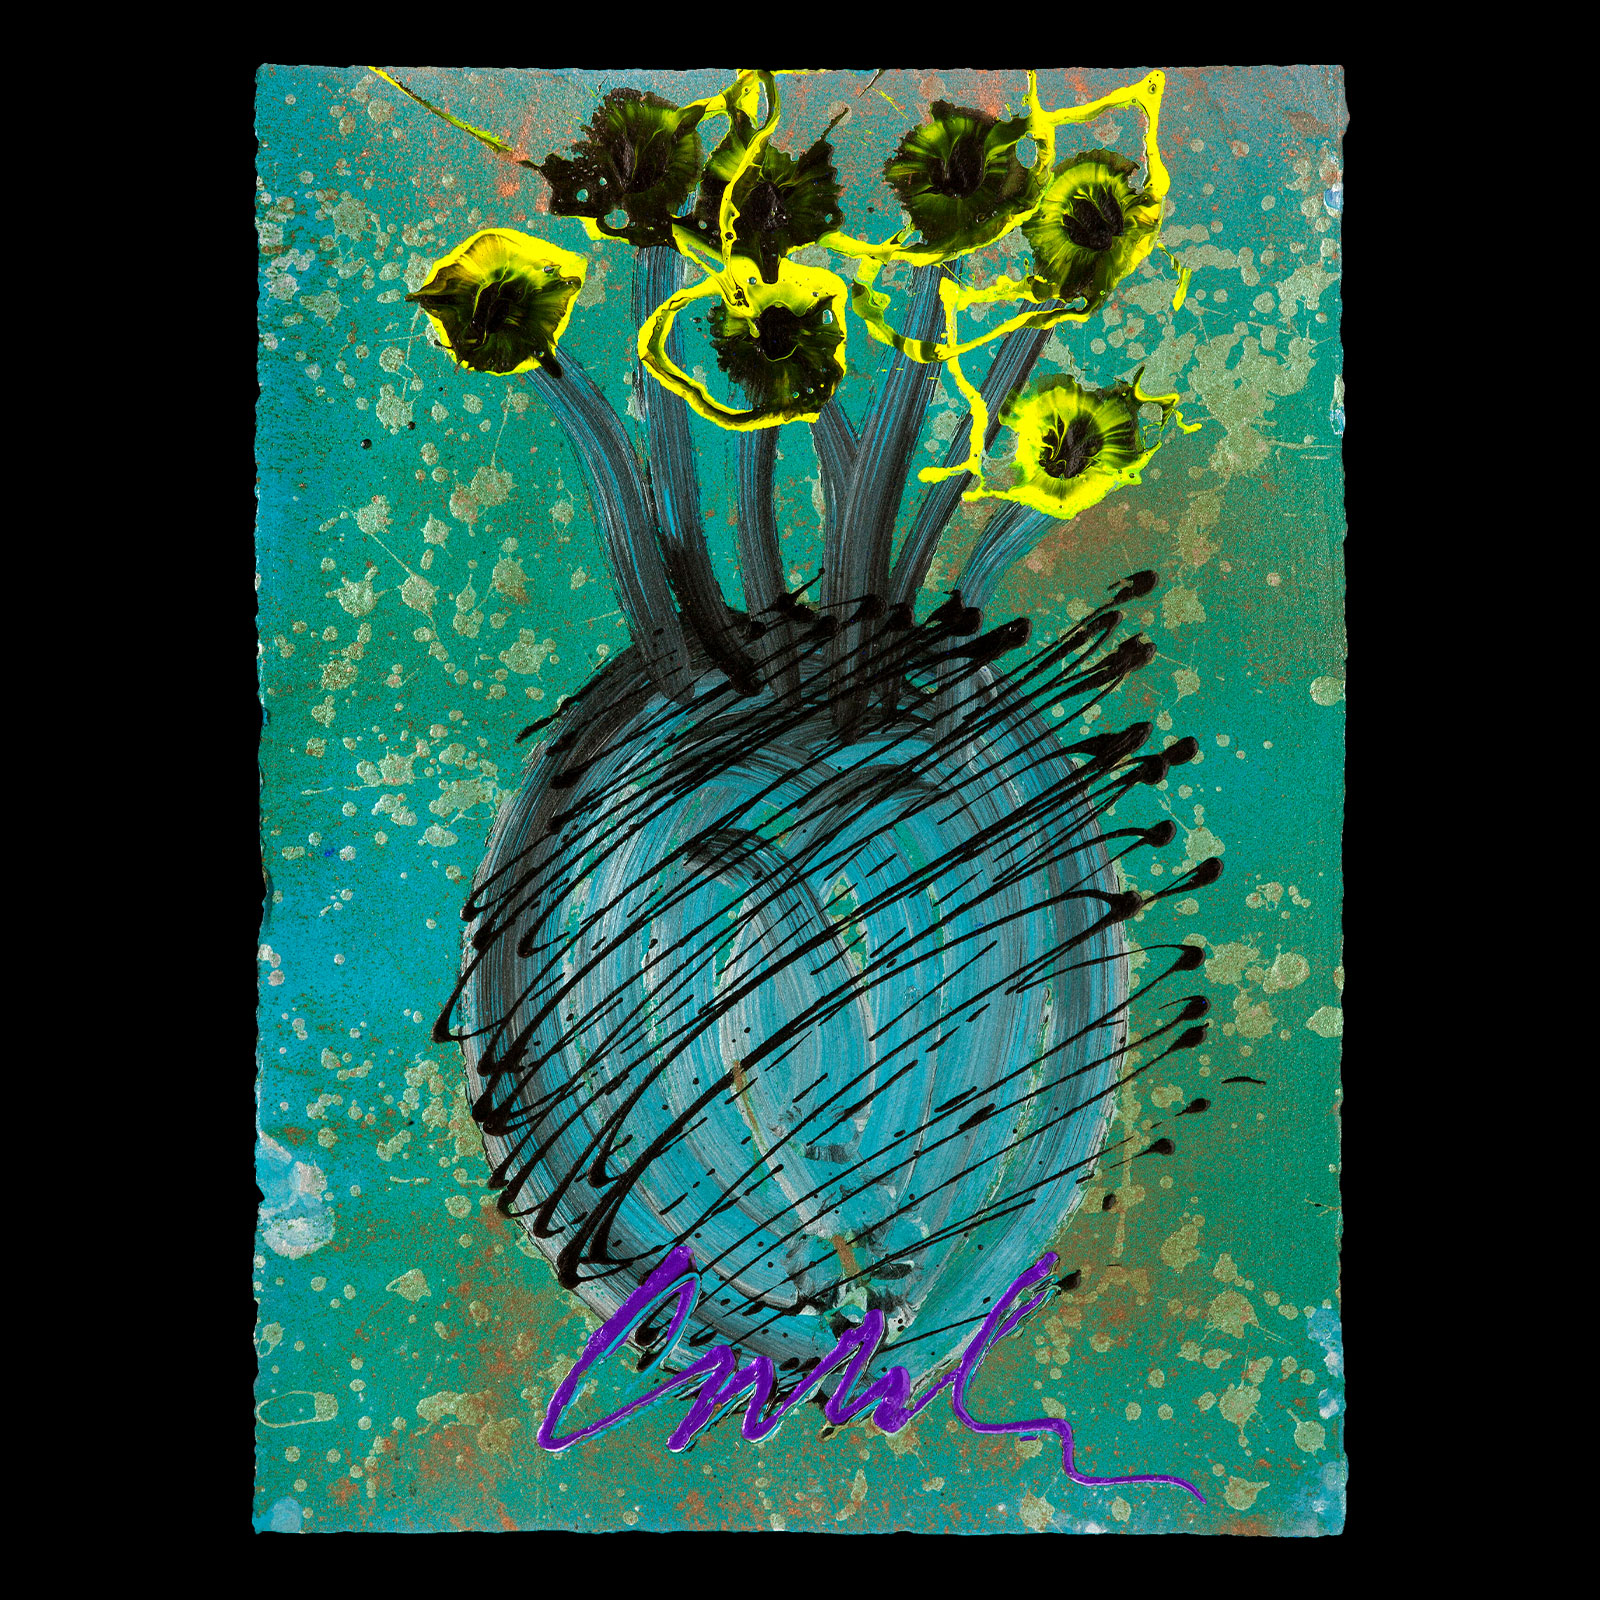 Ikebana Drawing, 2013 by Dale Chihuly